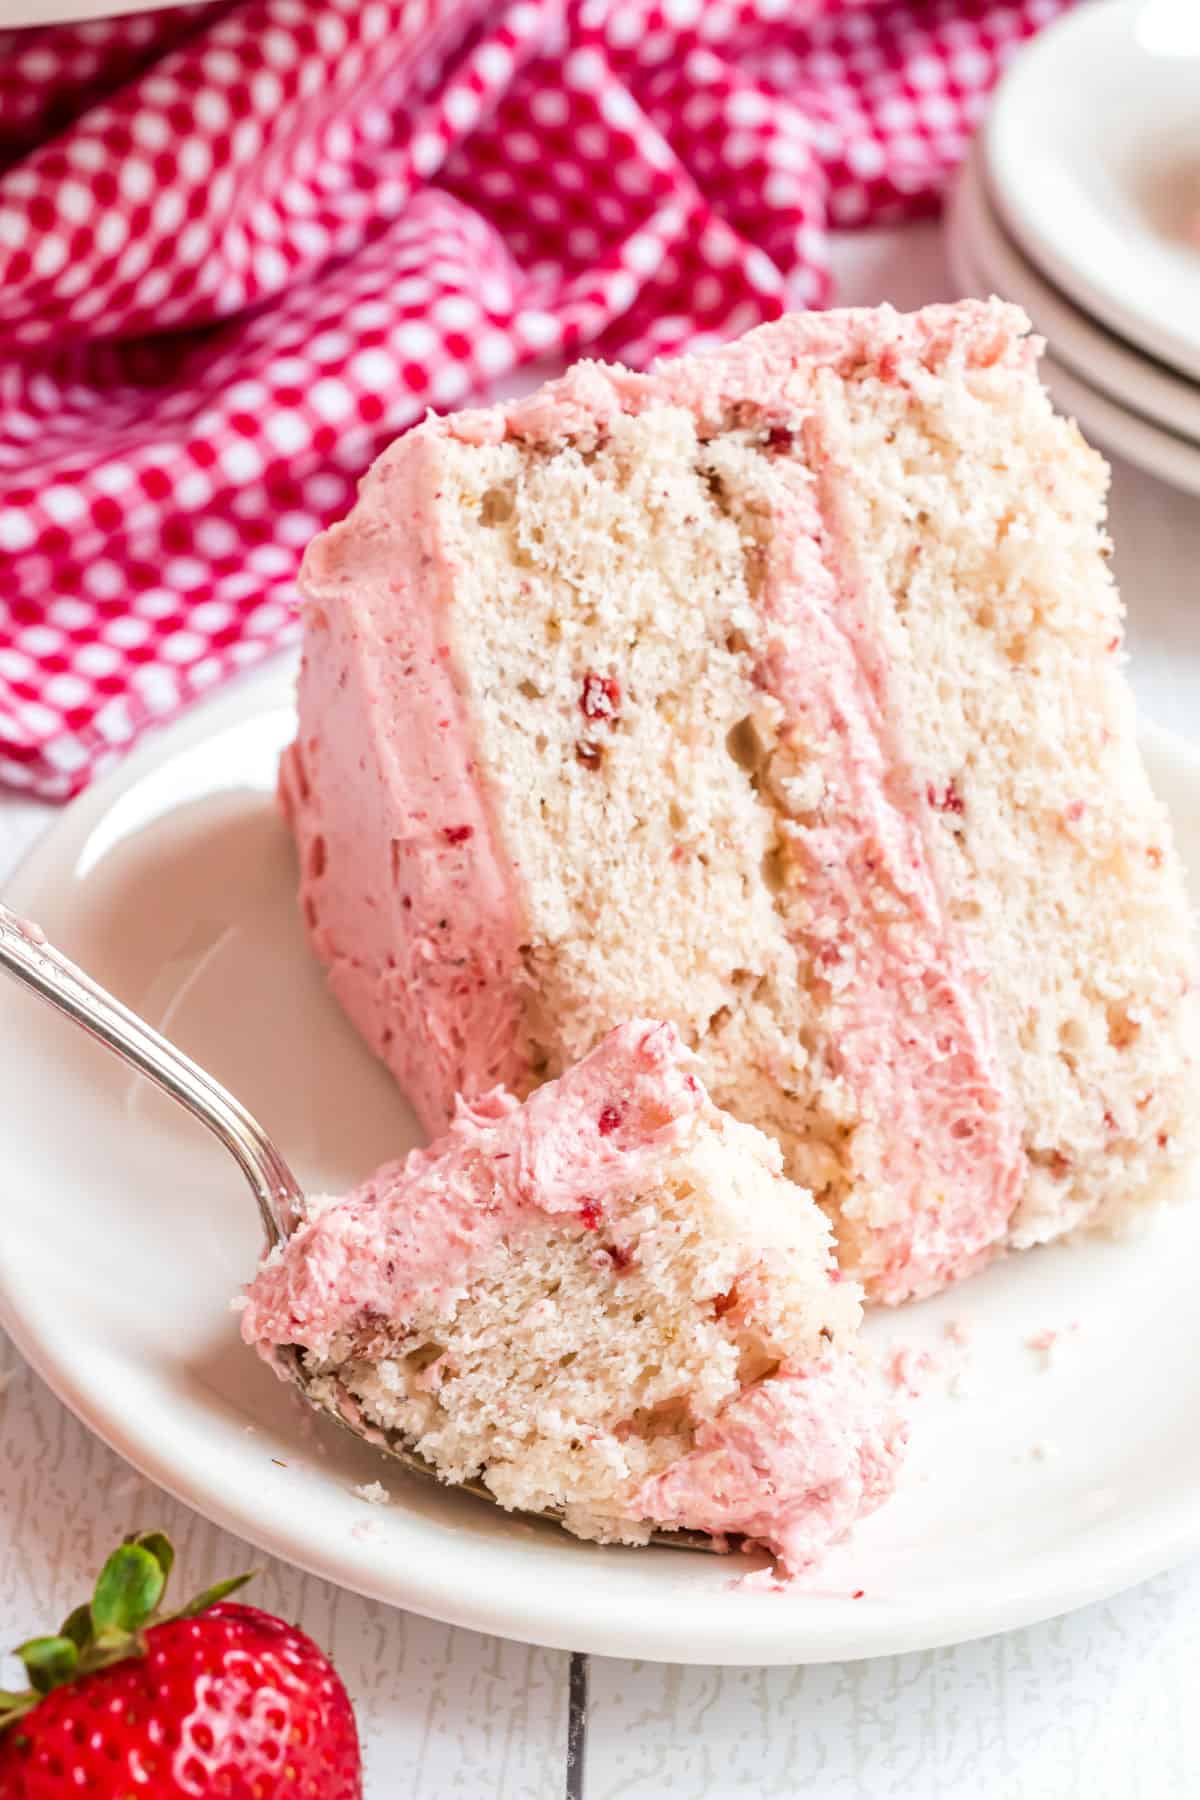 Slice of strawberry cake with a fork taking a bite.